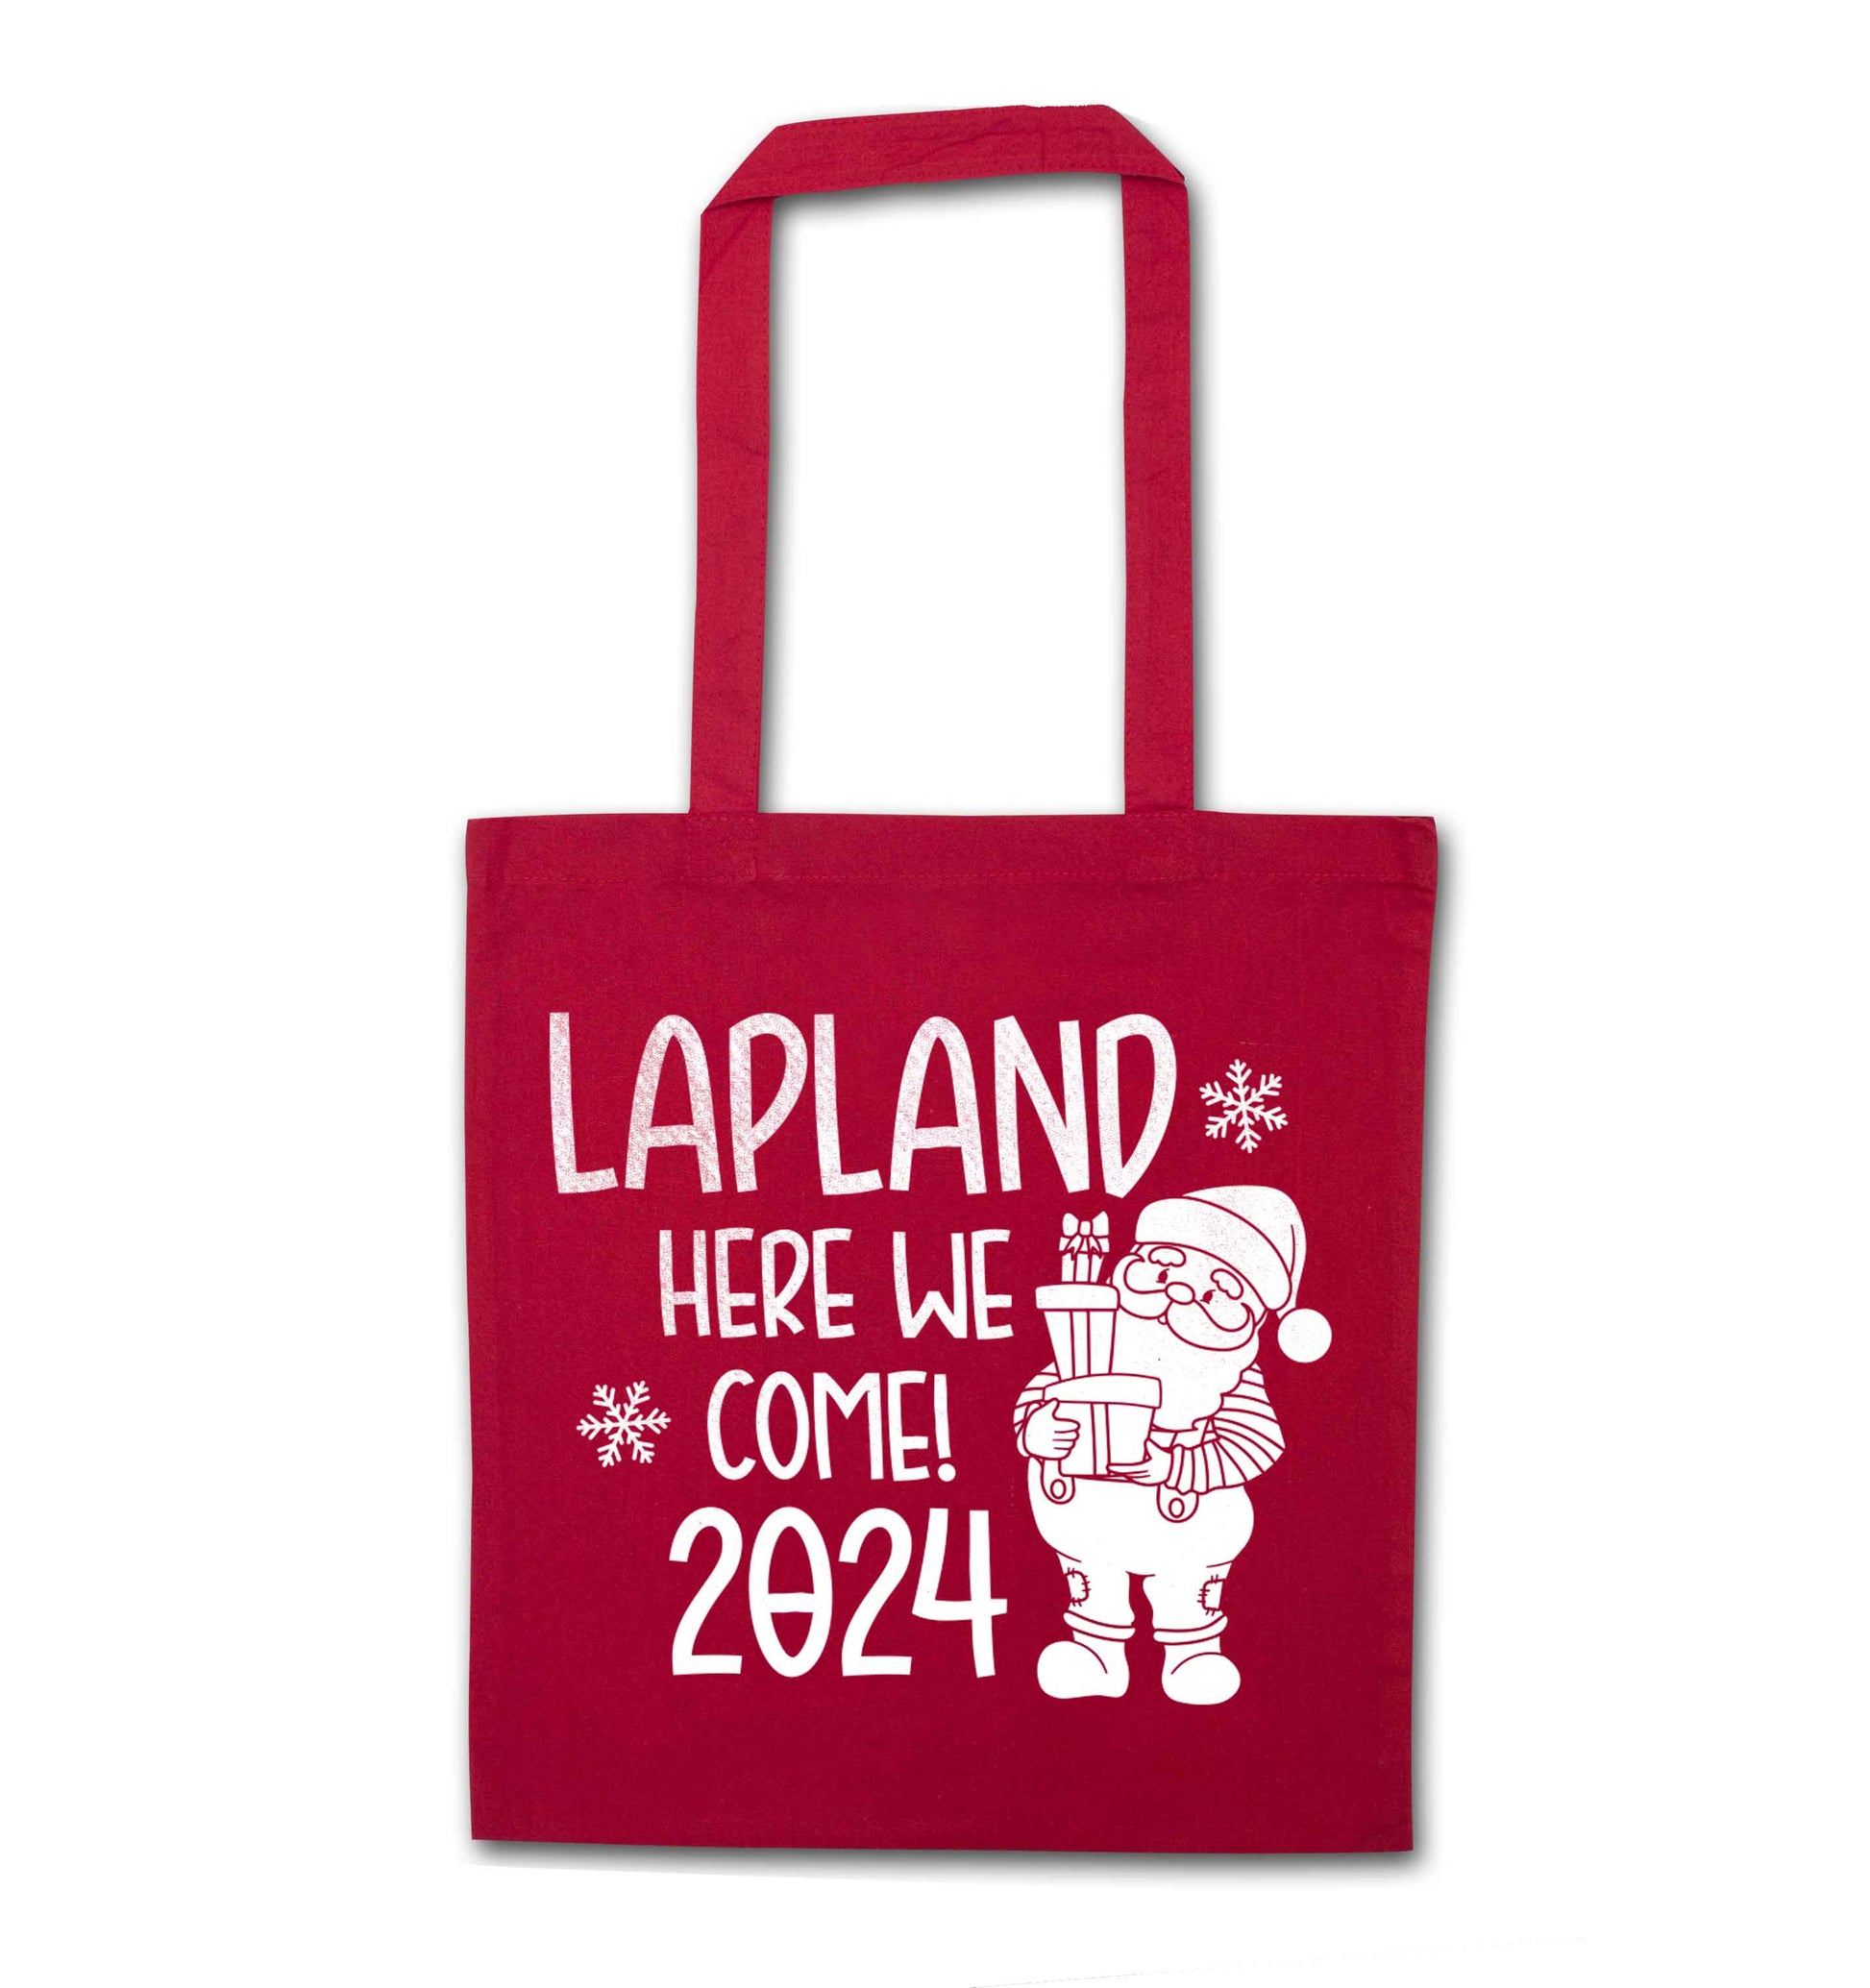 Lapland here we come red tote bag